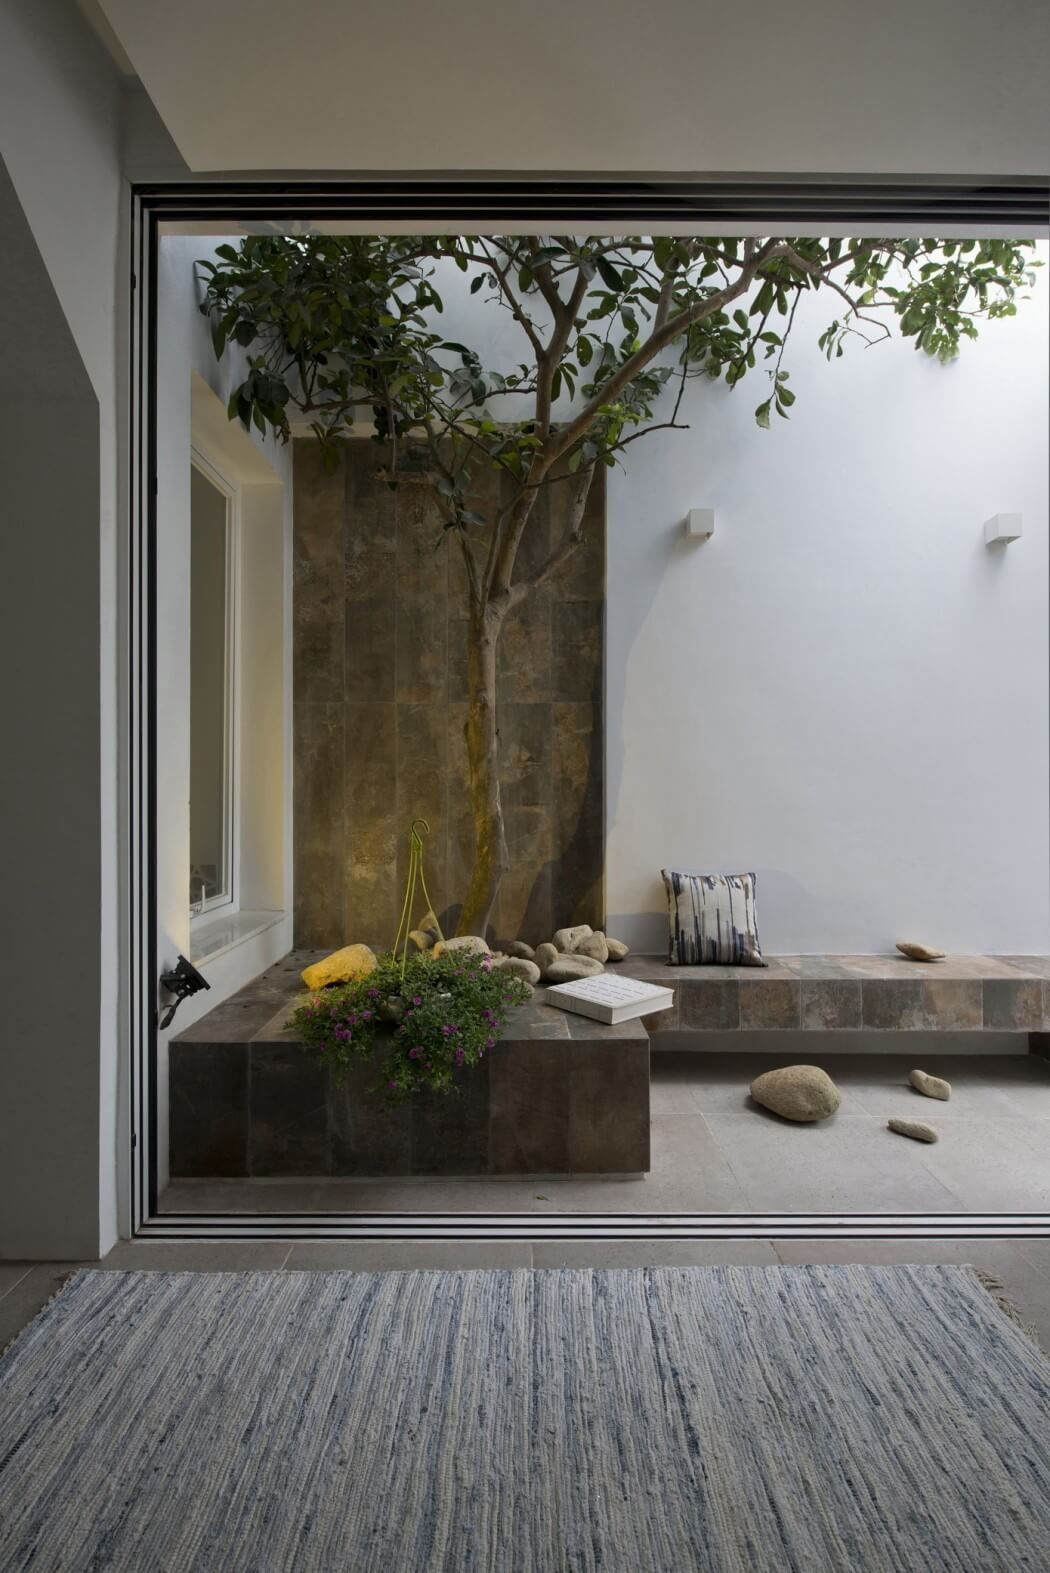 Would make a nice outdoor “sitting area” for the outdoor shower area, to towel off, relax, s